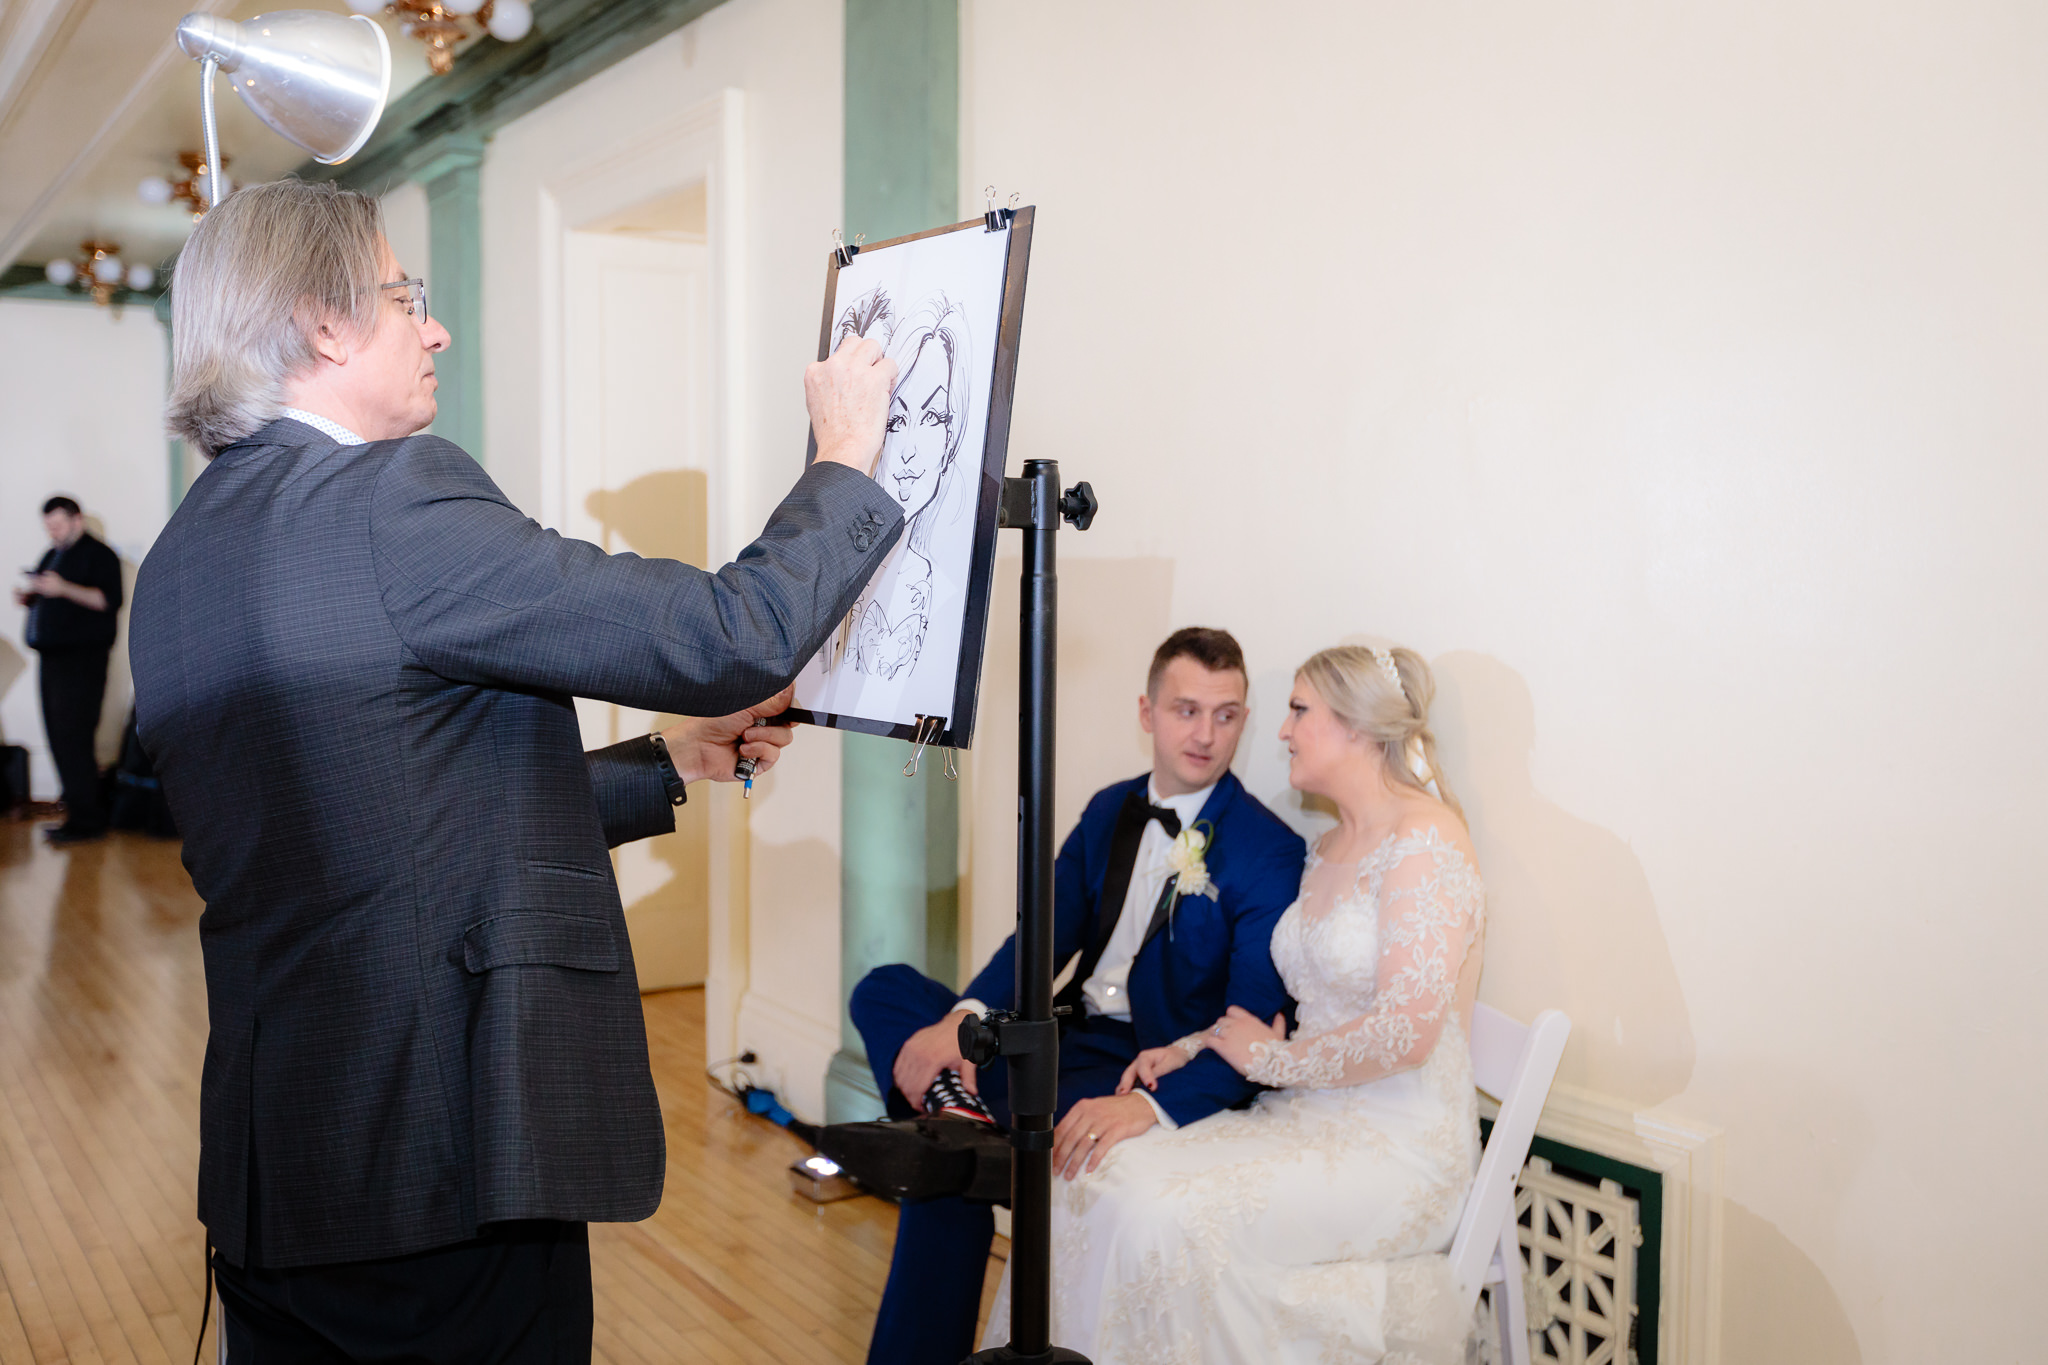 Caricature artist draws the newlyweds at their Soldiers & Sailors wedding